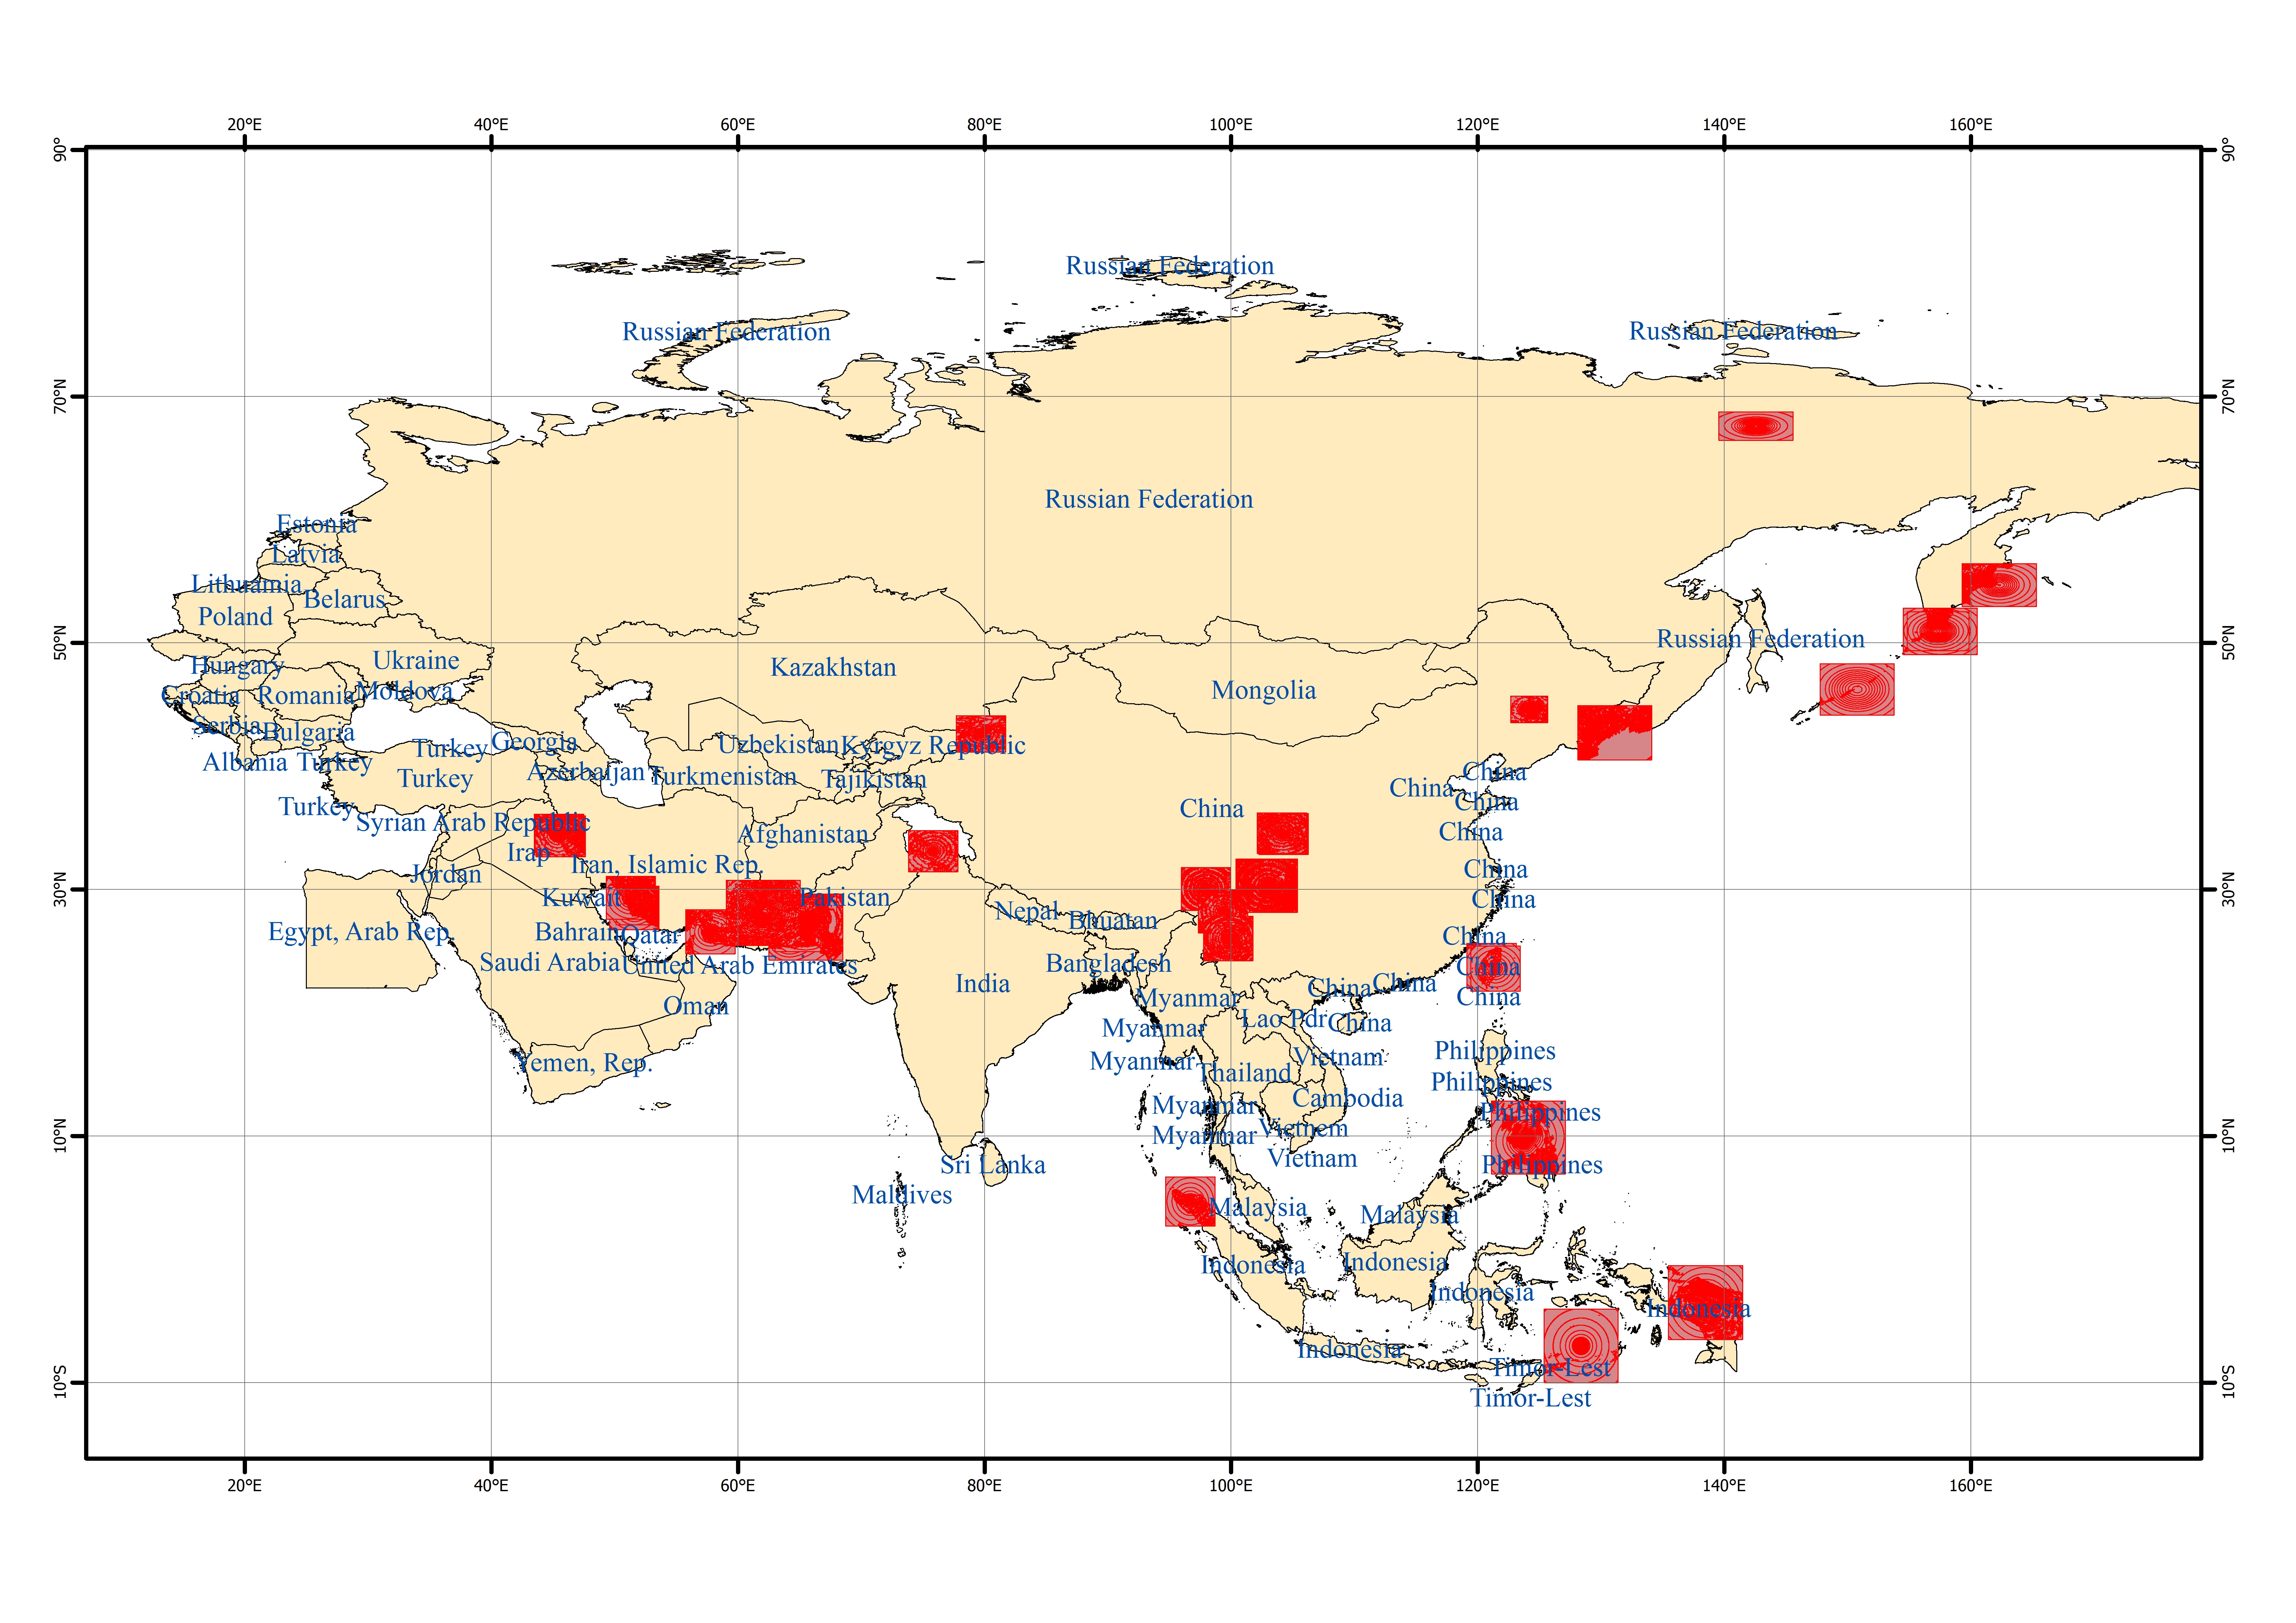 Spatio-temporal Distribution of Earthquake Disaster in the Belt and Road Area of 2013